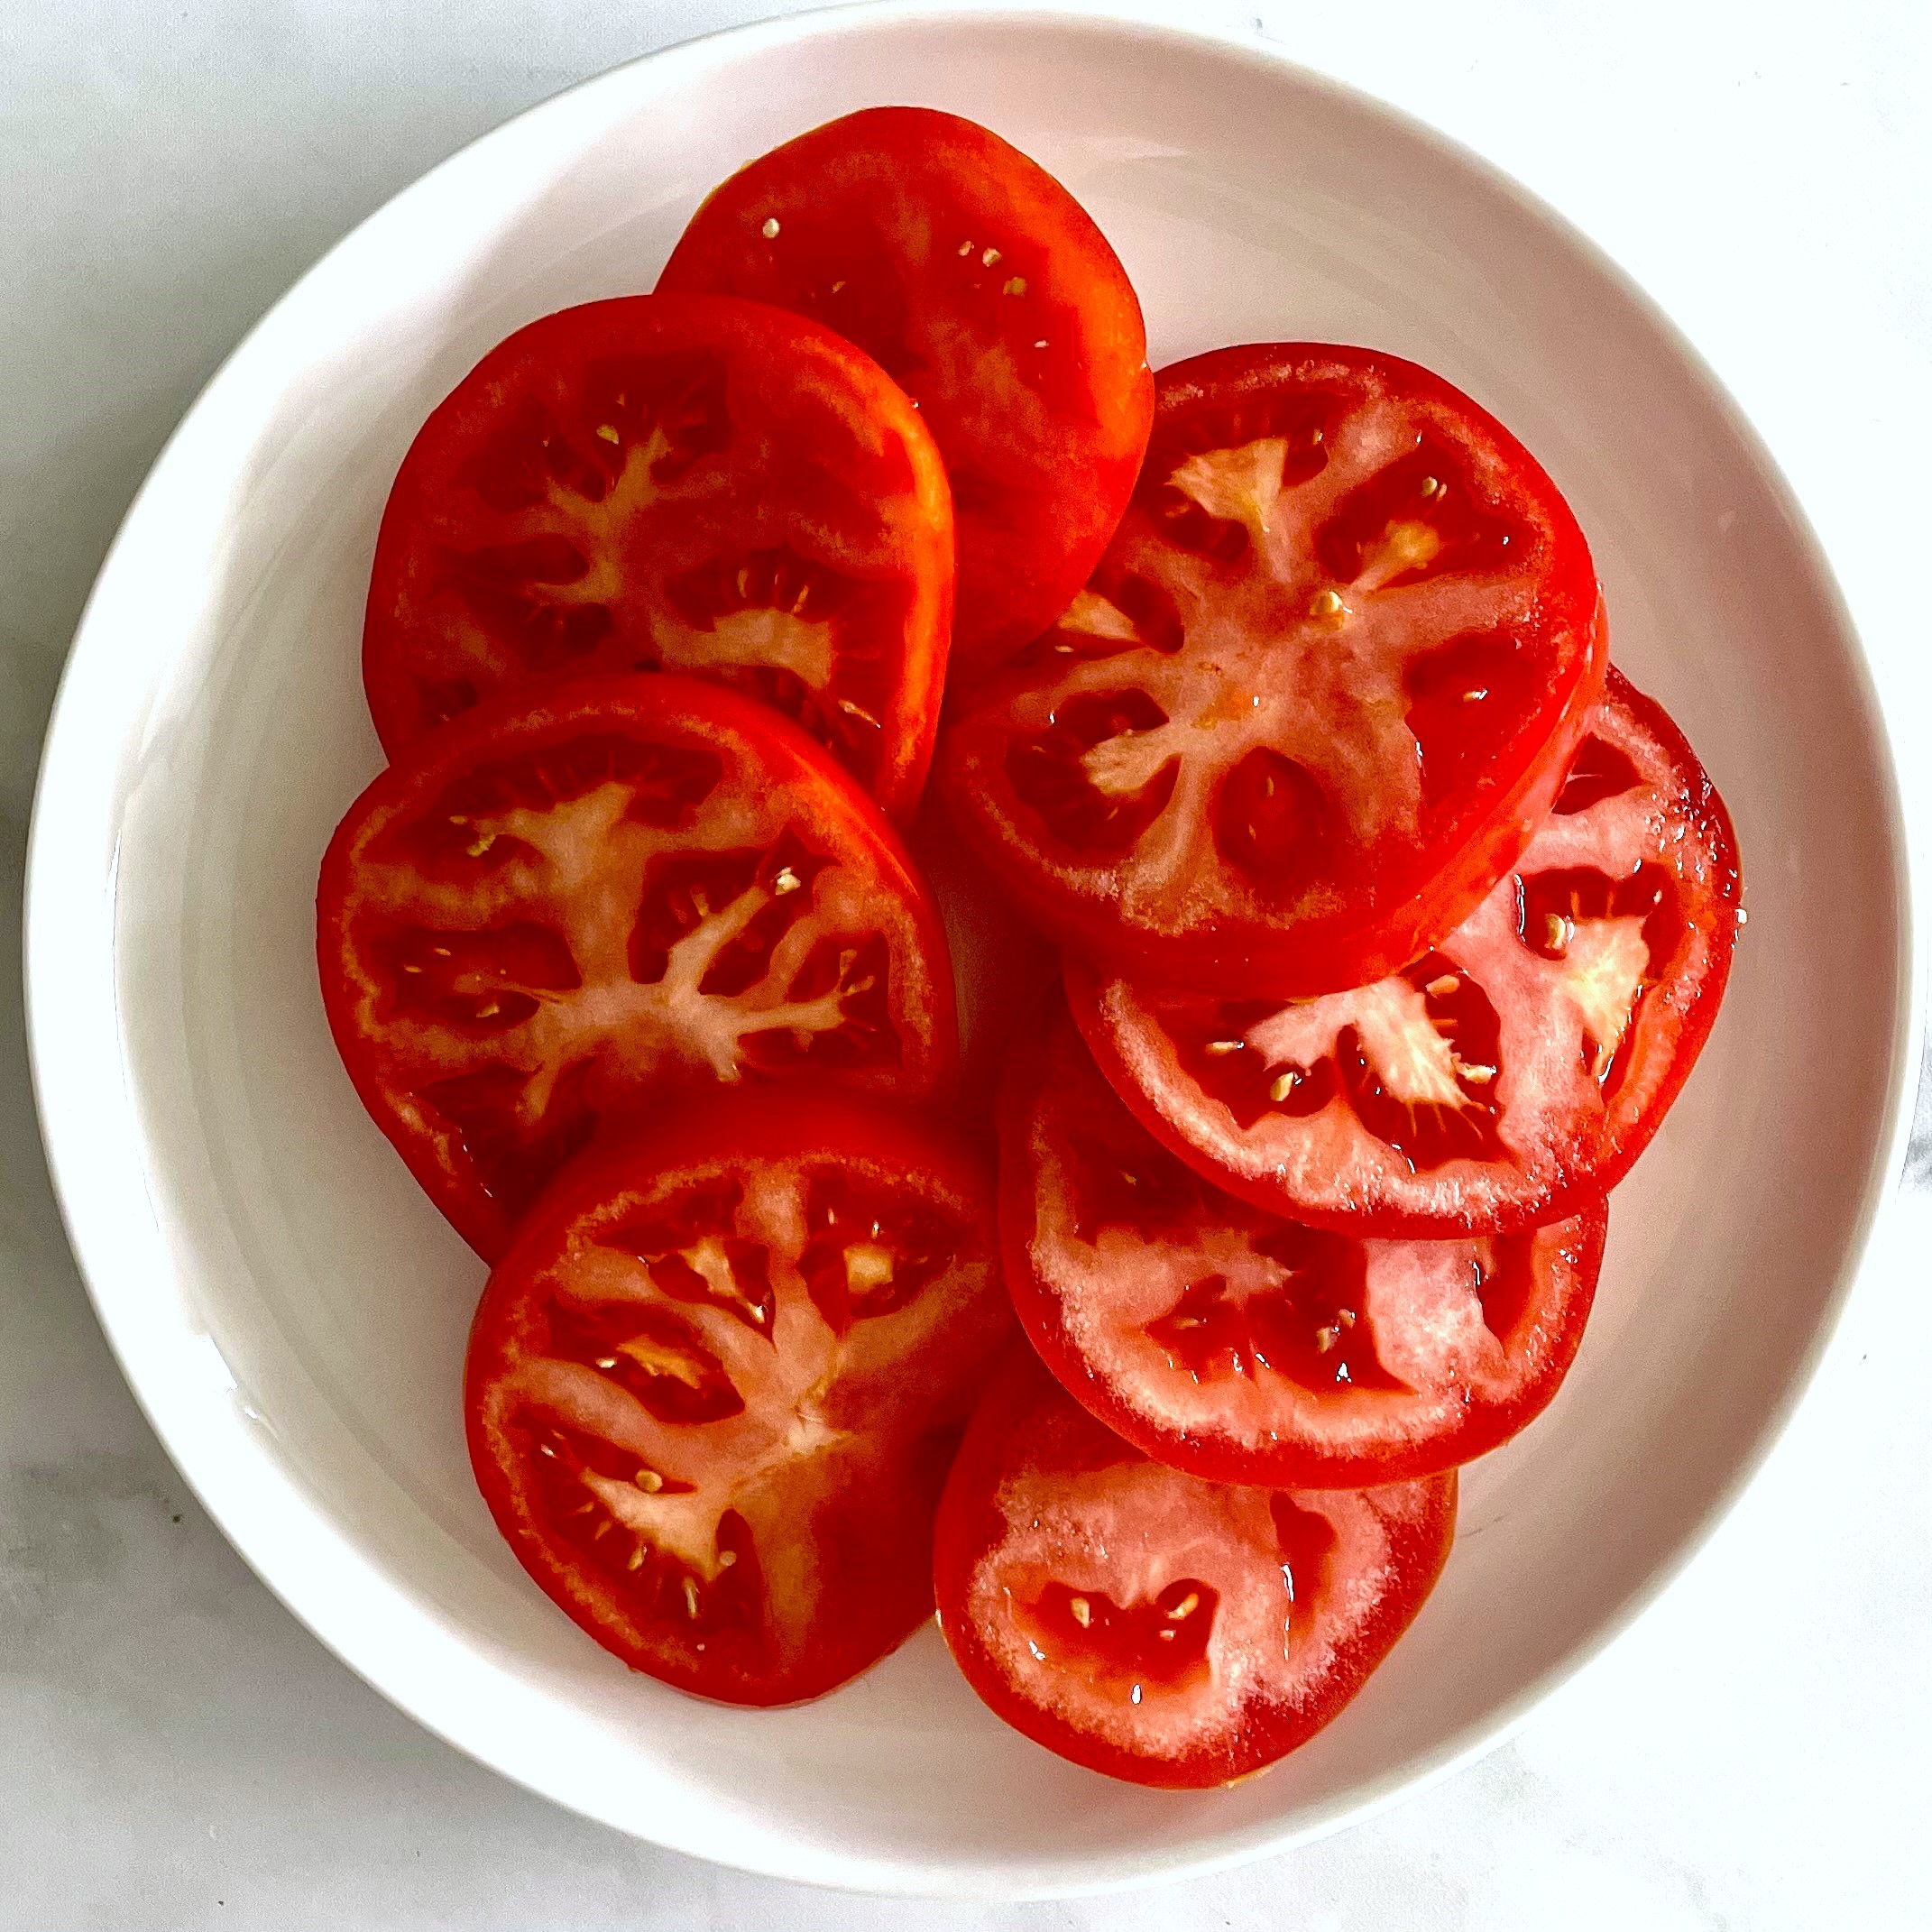 plate of tomato slices